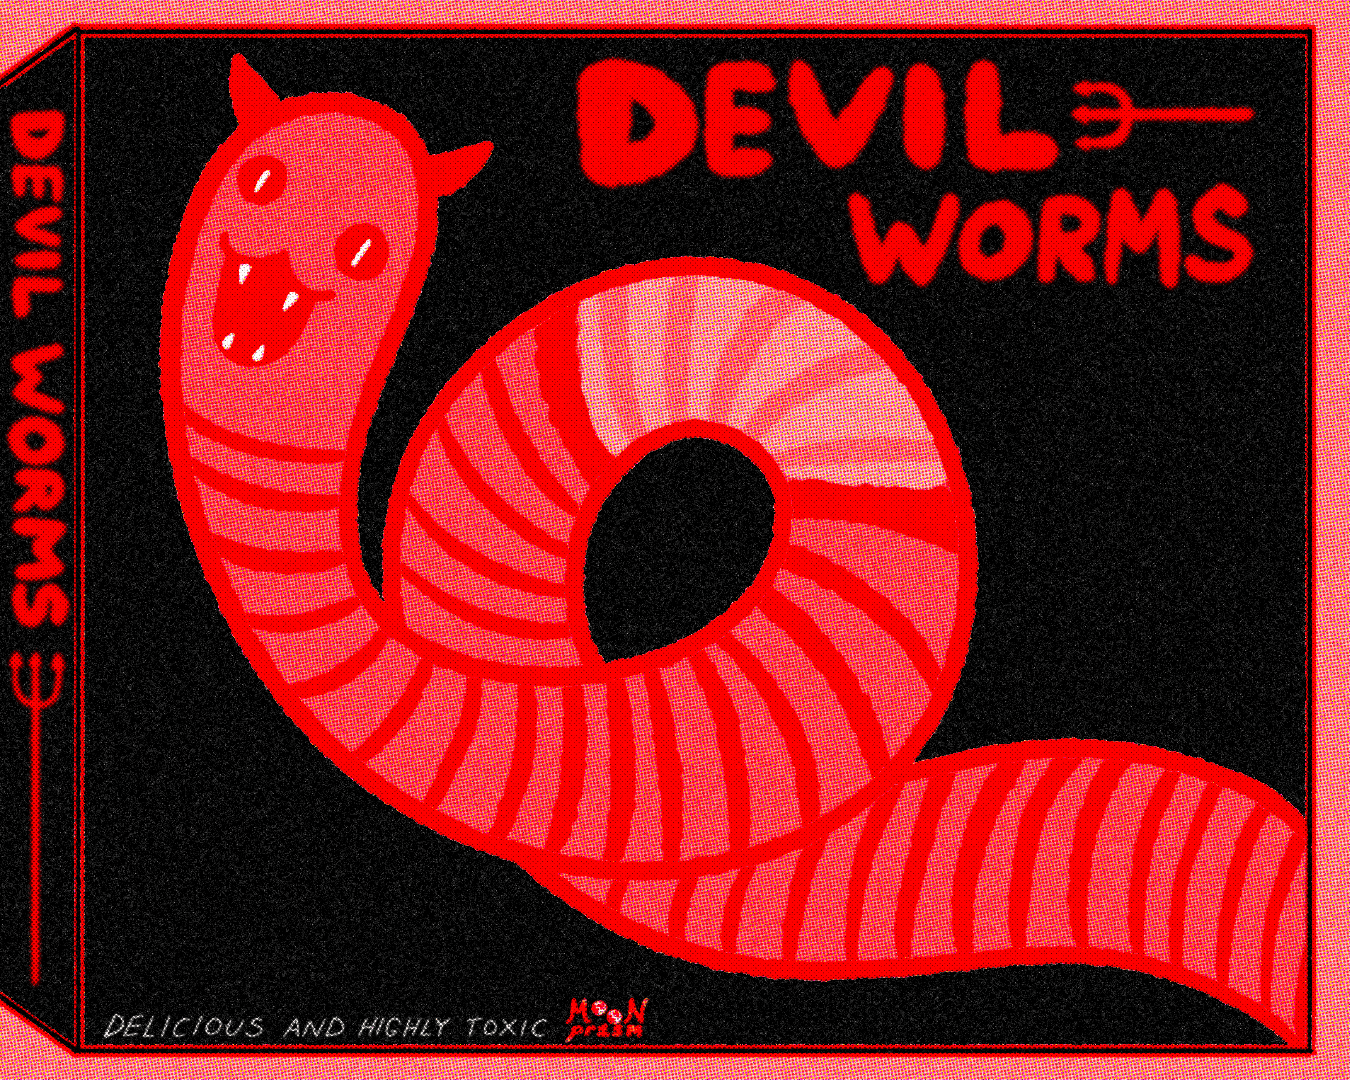 An illustration that looks like an ad for a box of 'devil worms', featuring a big red and pink worm with fangs and horns on the black box.